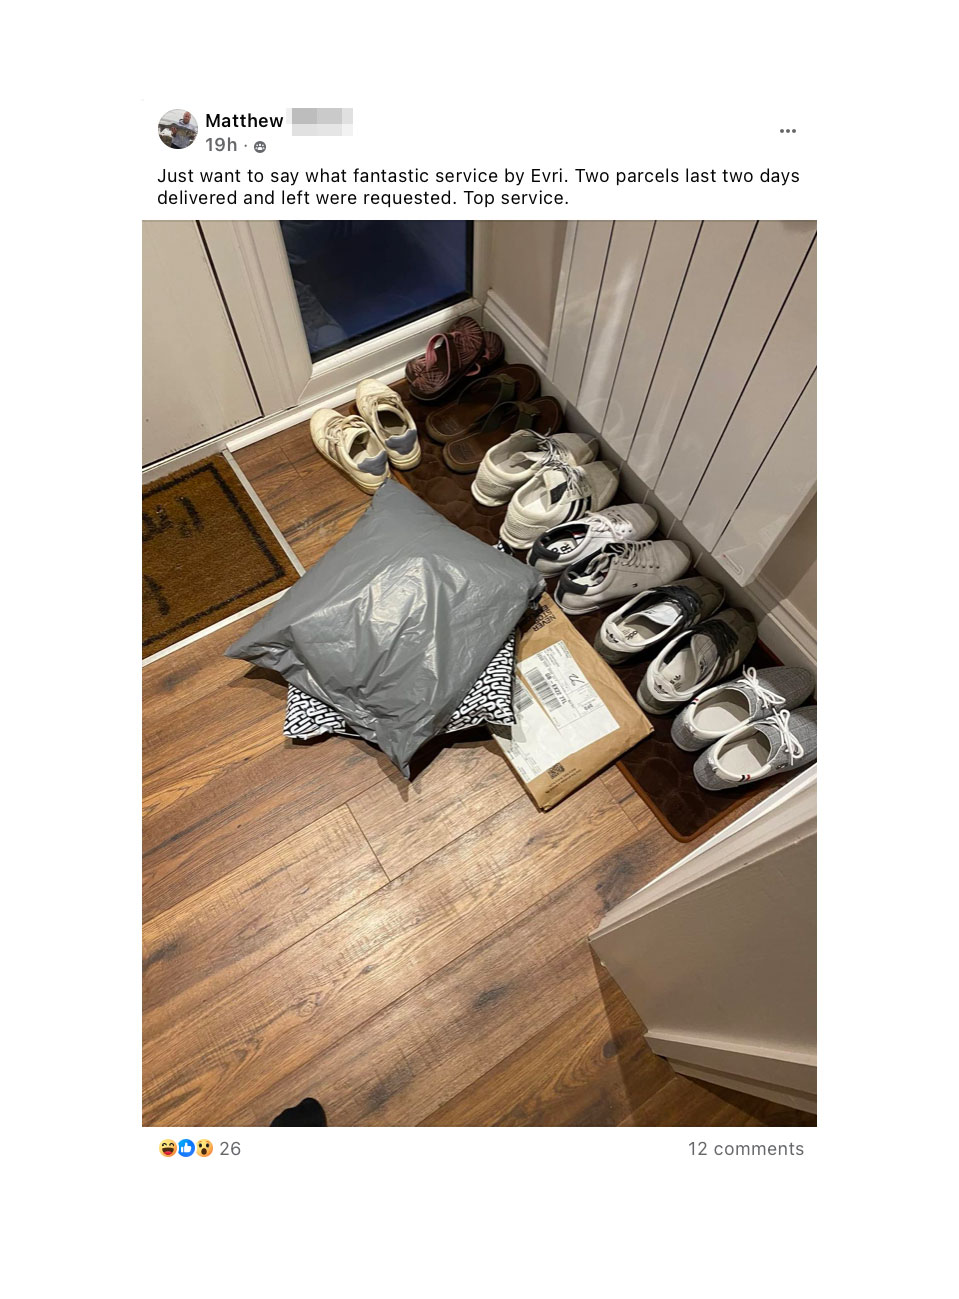 shocking Villagers irate after they keep getting each other's Evri parcels in series of blunders by bungling courier, people take to Facebook to ensure their parcels get to the correct destination.